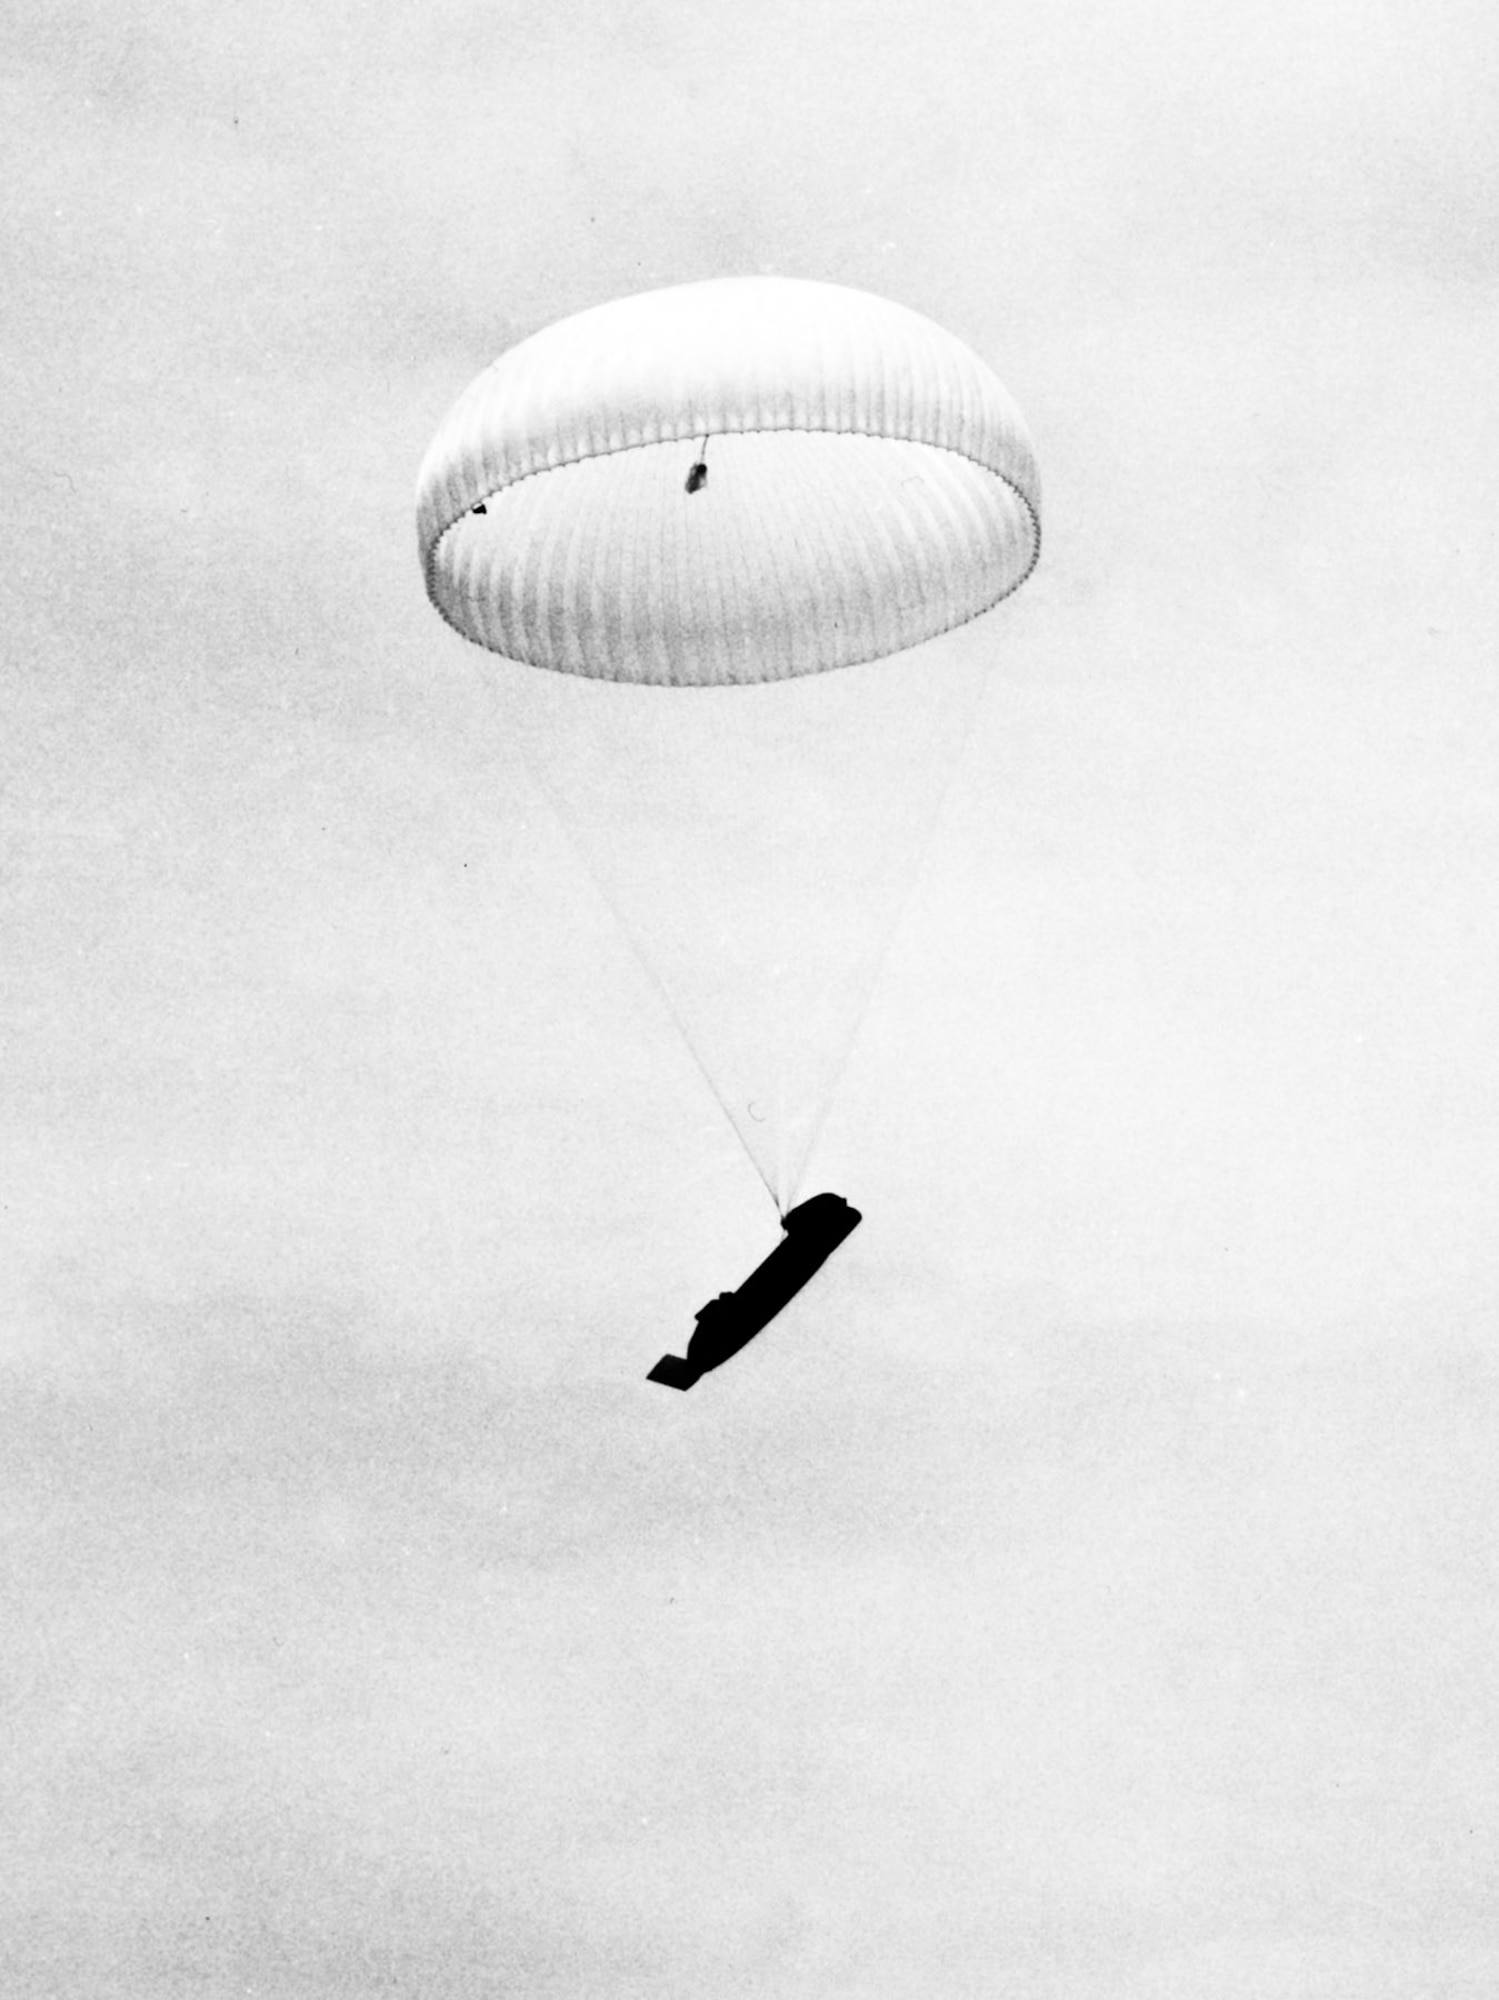 The 100-foot main parachute slows the 1.5-ton boat’s descent. (U.S. Air Force)